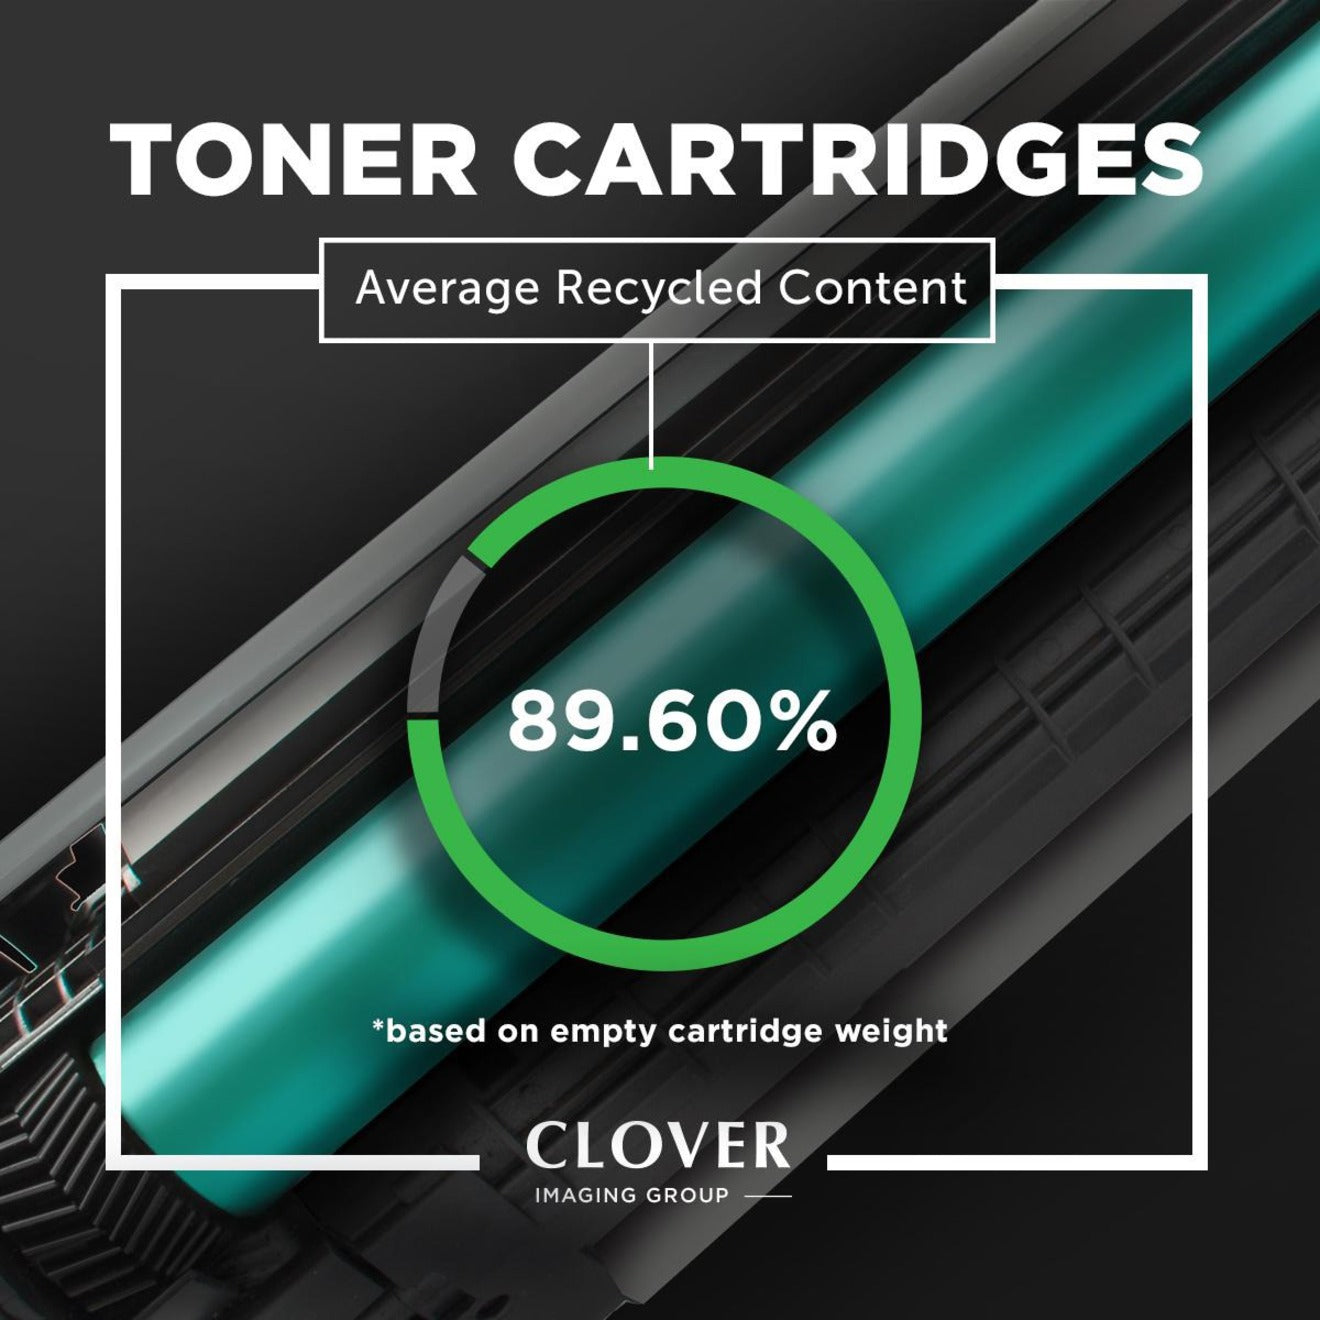 Clover Technologies Remanufactured Extended Yield Laser Toner Cartridge - Alternative for HP Canon Troy 12A 12L 703 (Q2612A Q2612A(J) Q2612L Q2612X7616A005 7616A005AA CRG703 EP703 02-81132-001 2-81132-001) - Black Pack